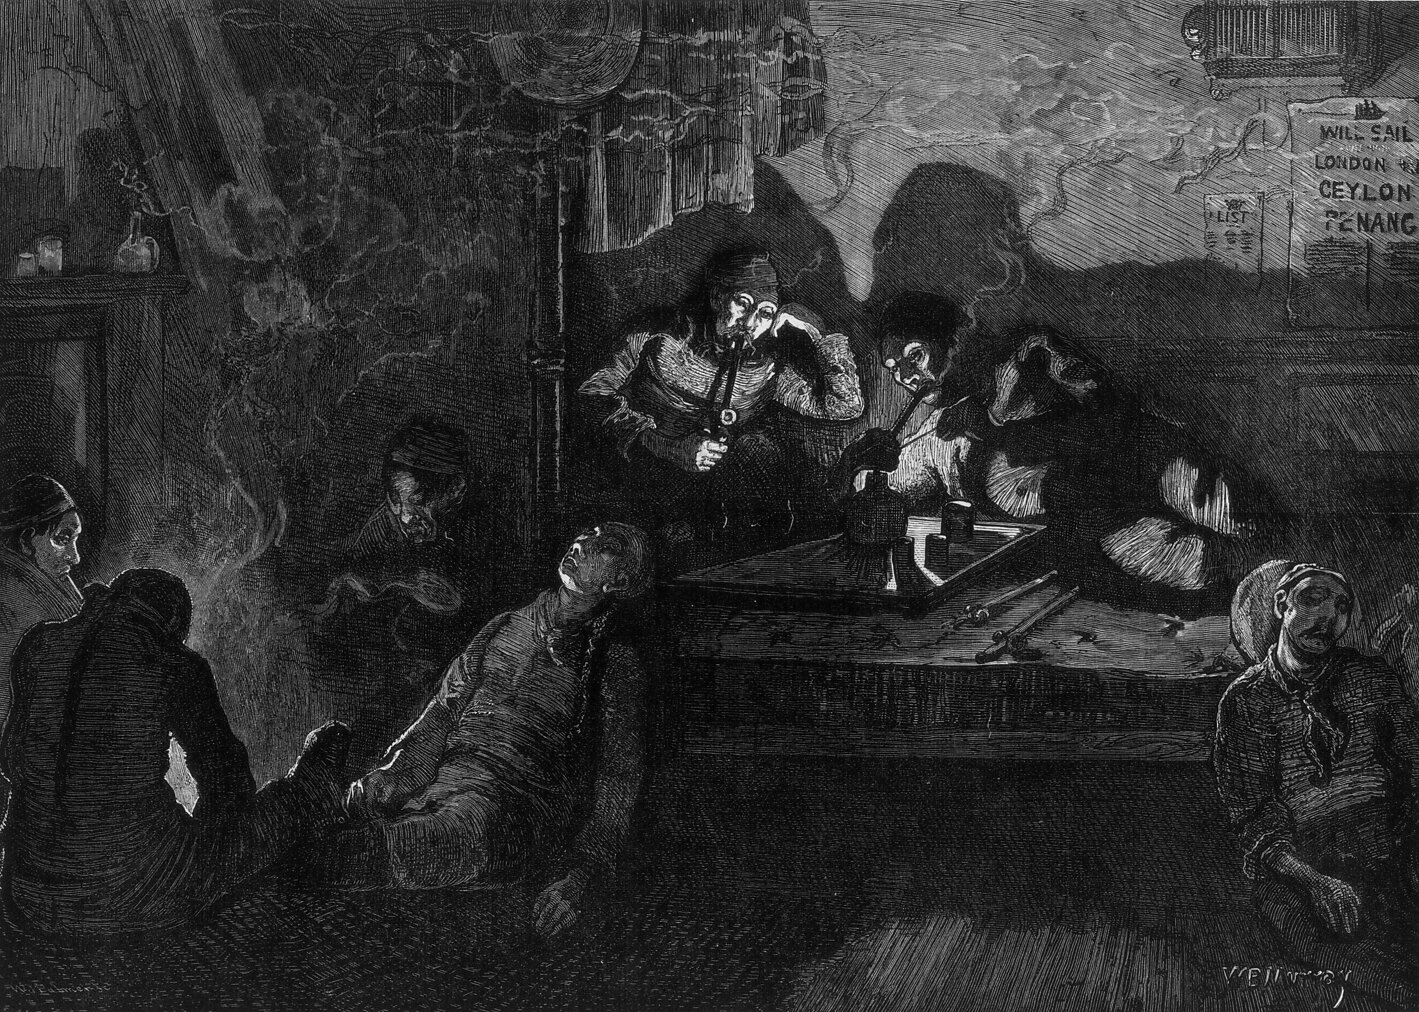 An 1874 illustration of men smoking opium in an opium den in the East End of London.